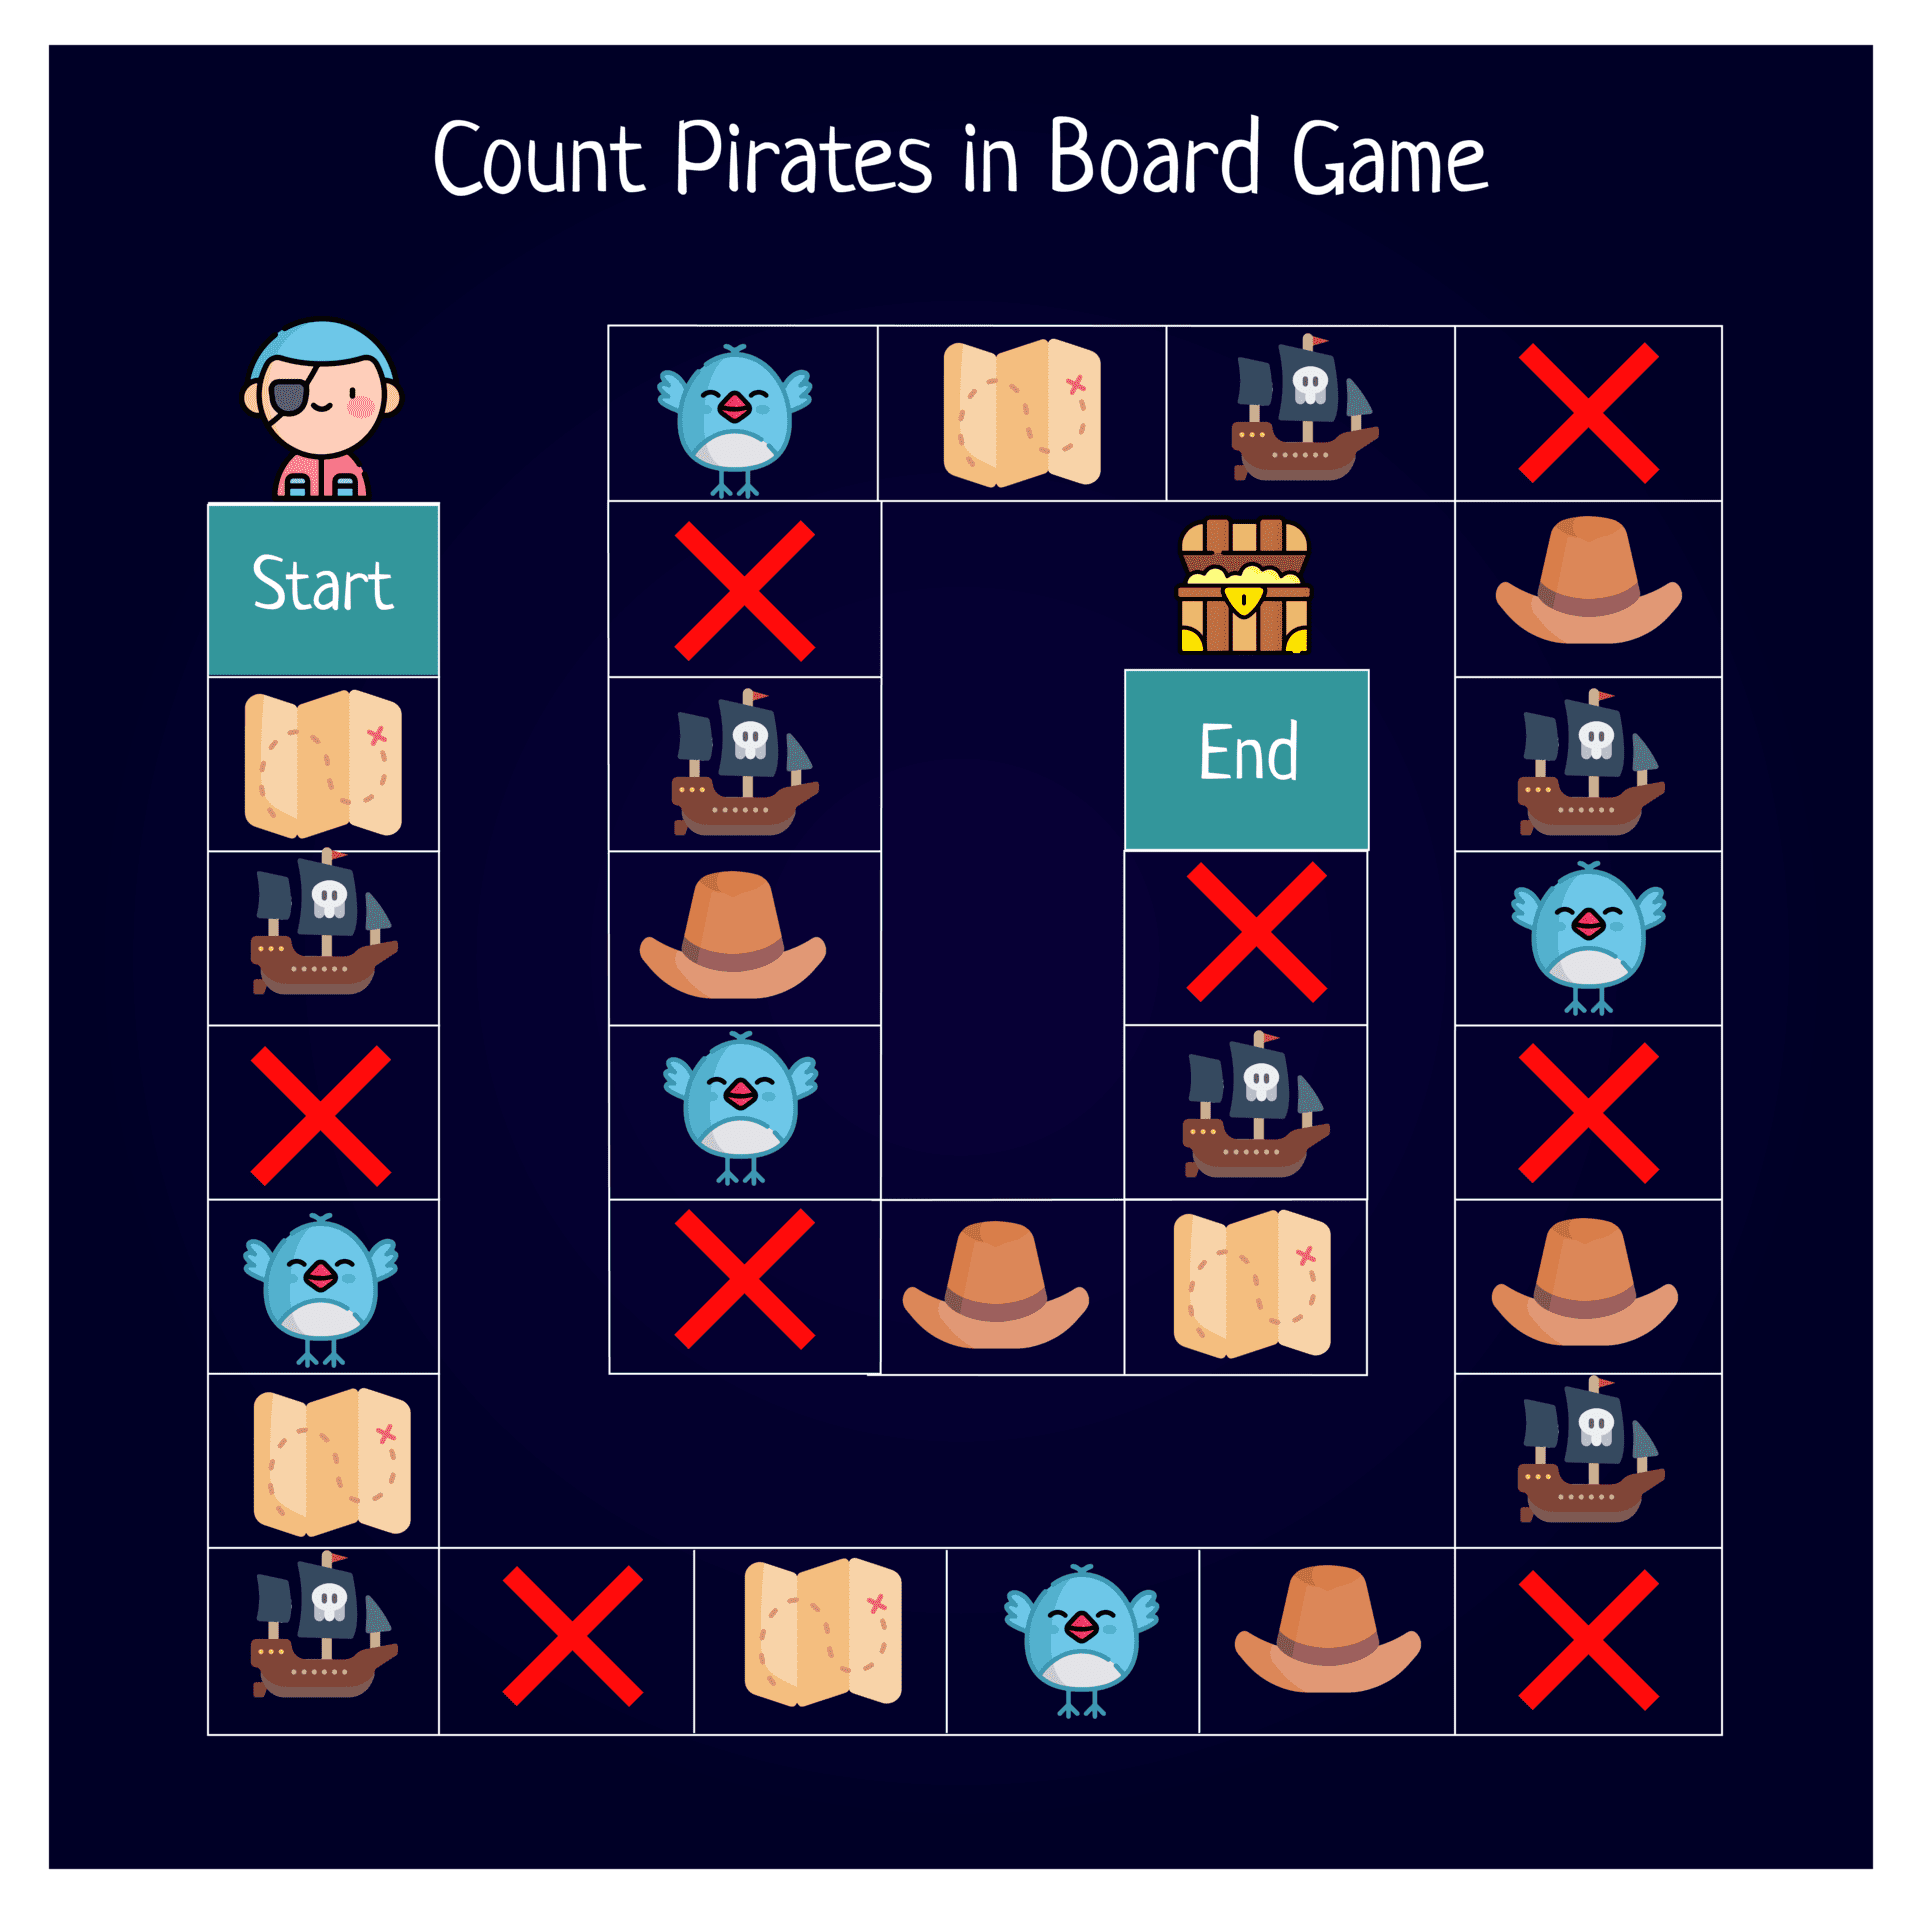 Count Pirates in Board Game